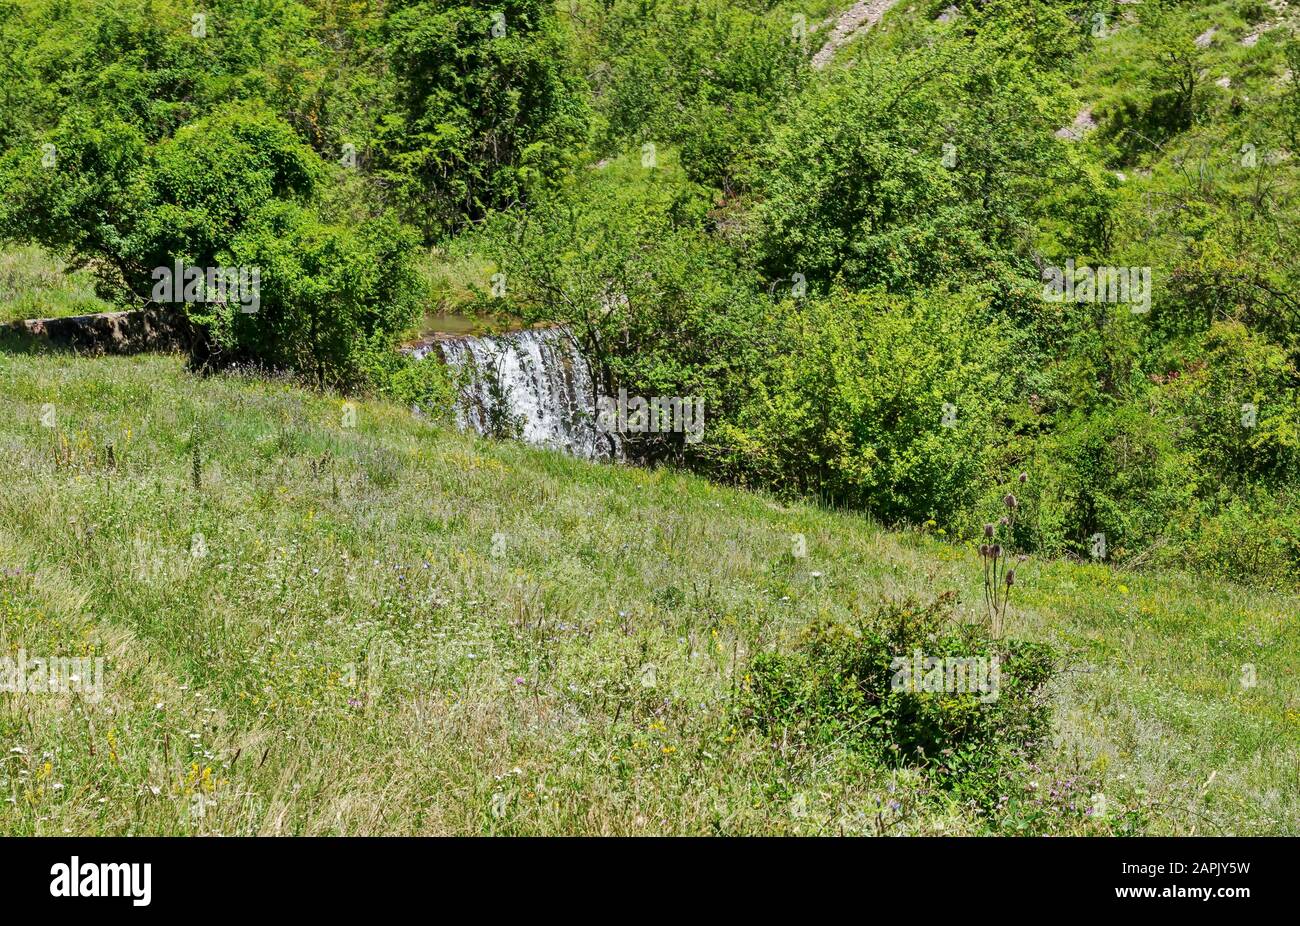 Beautiful  deciduous  forest, fresh glade with different grass and waterfall  in Balkan mountain, near Zhelyava village, Sofia region, Bulgaria Stock Photo